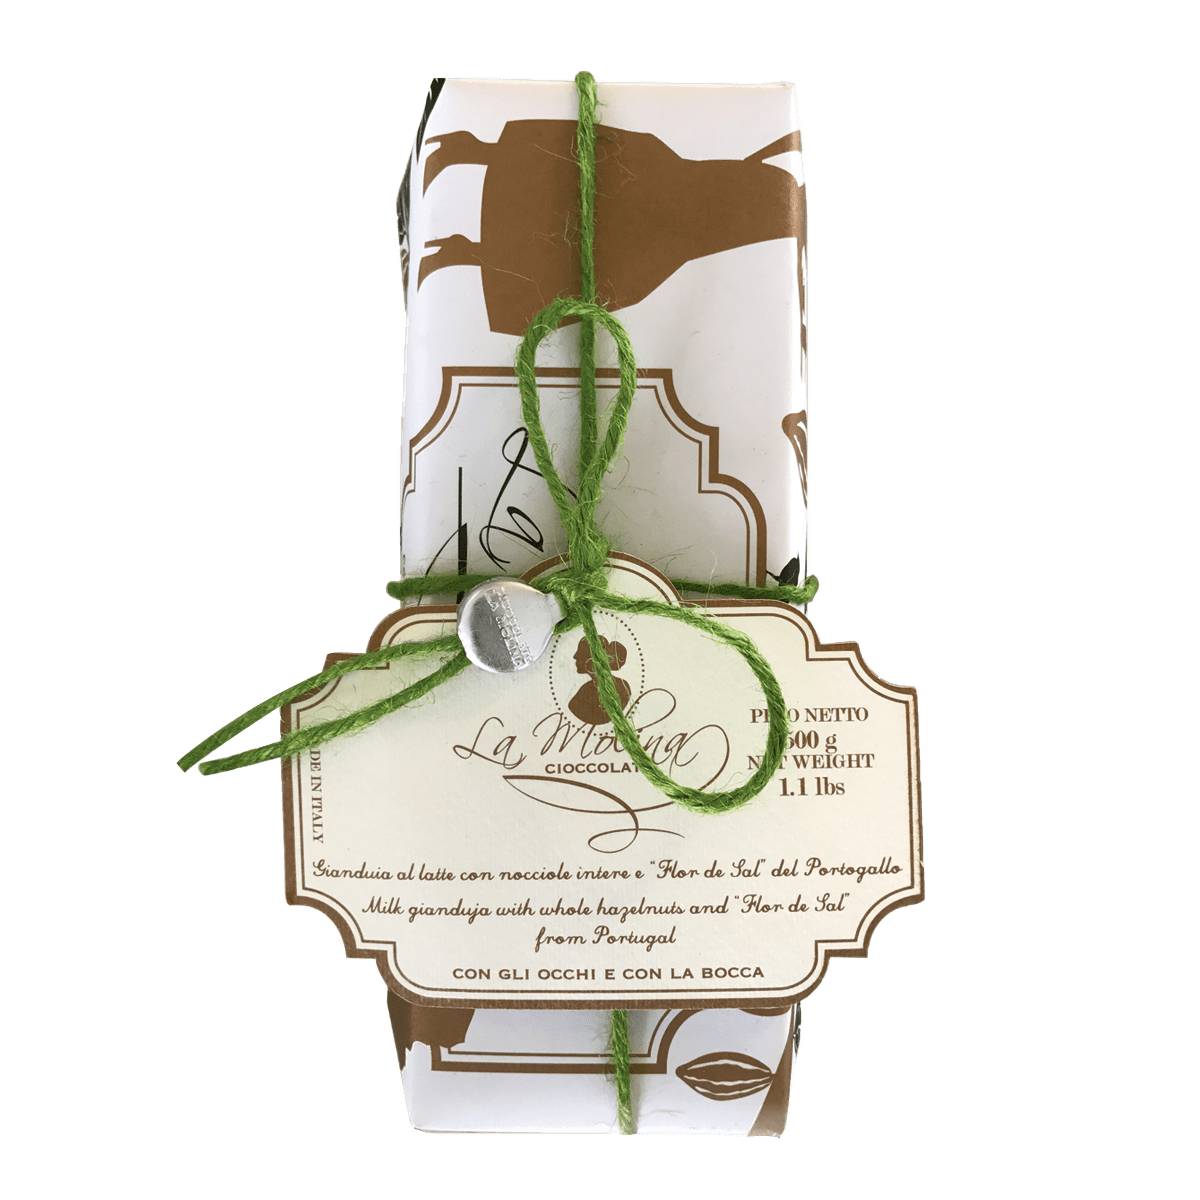 ONCE UPON A TIME salted milk gianduja with whole hazelnuts ,500 gr